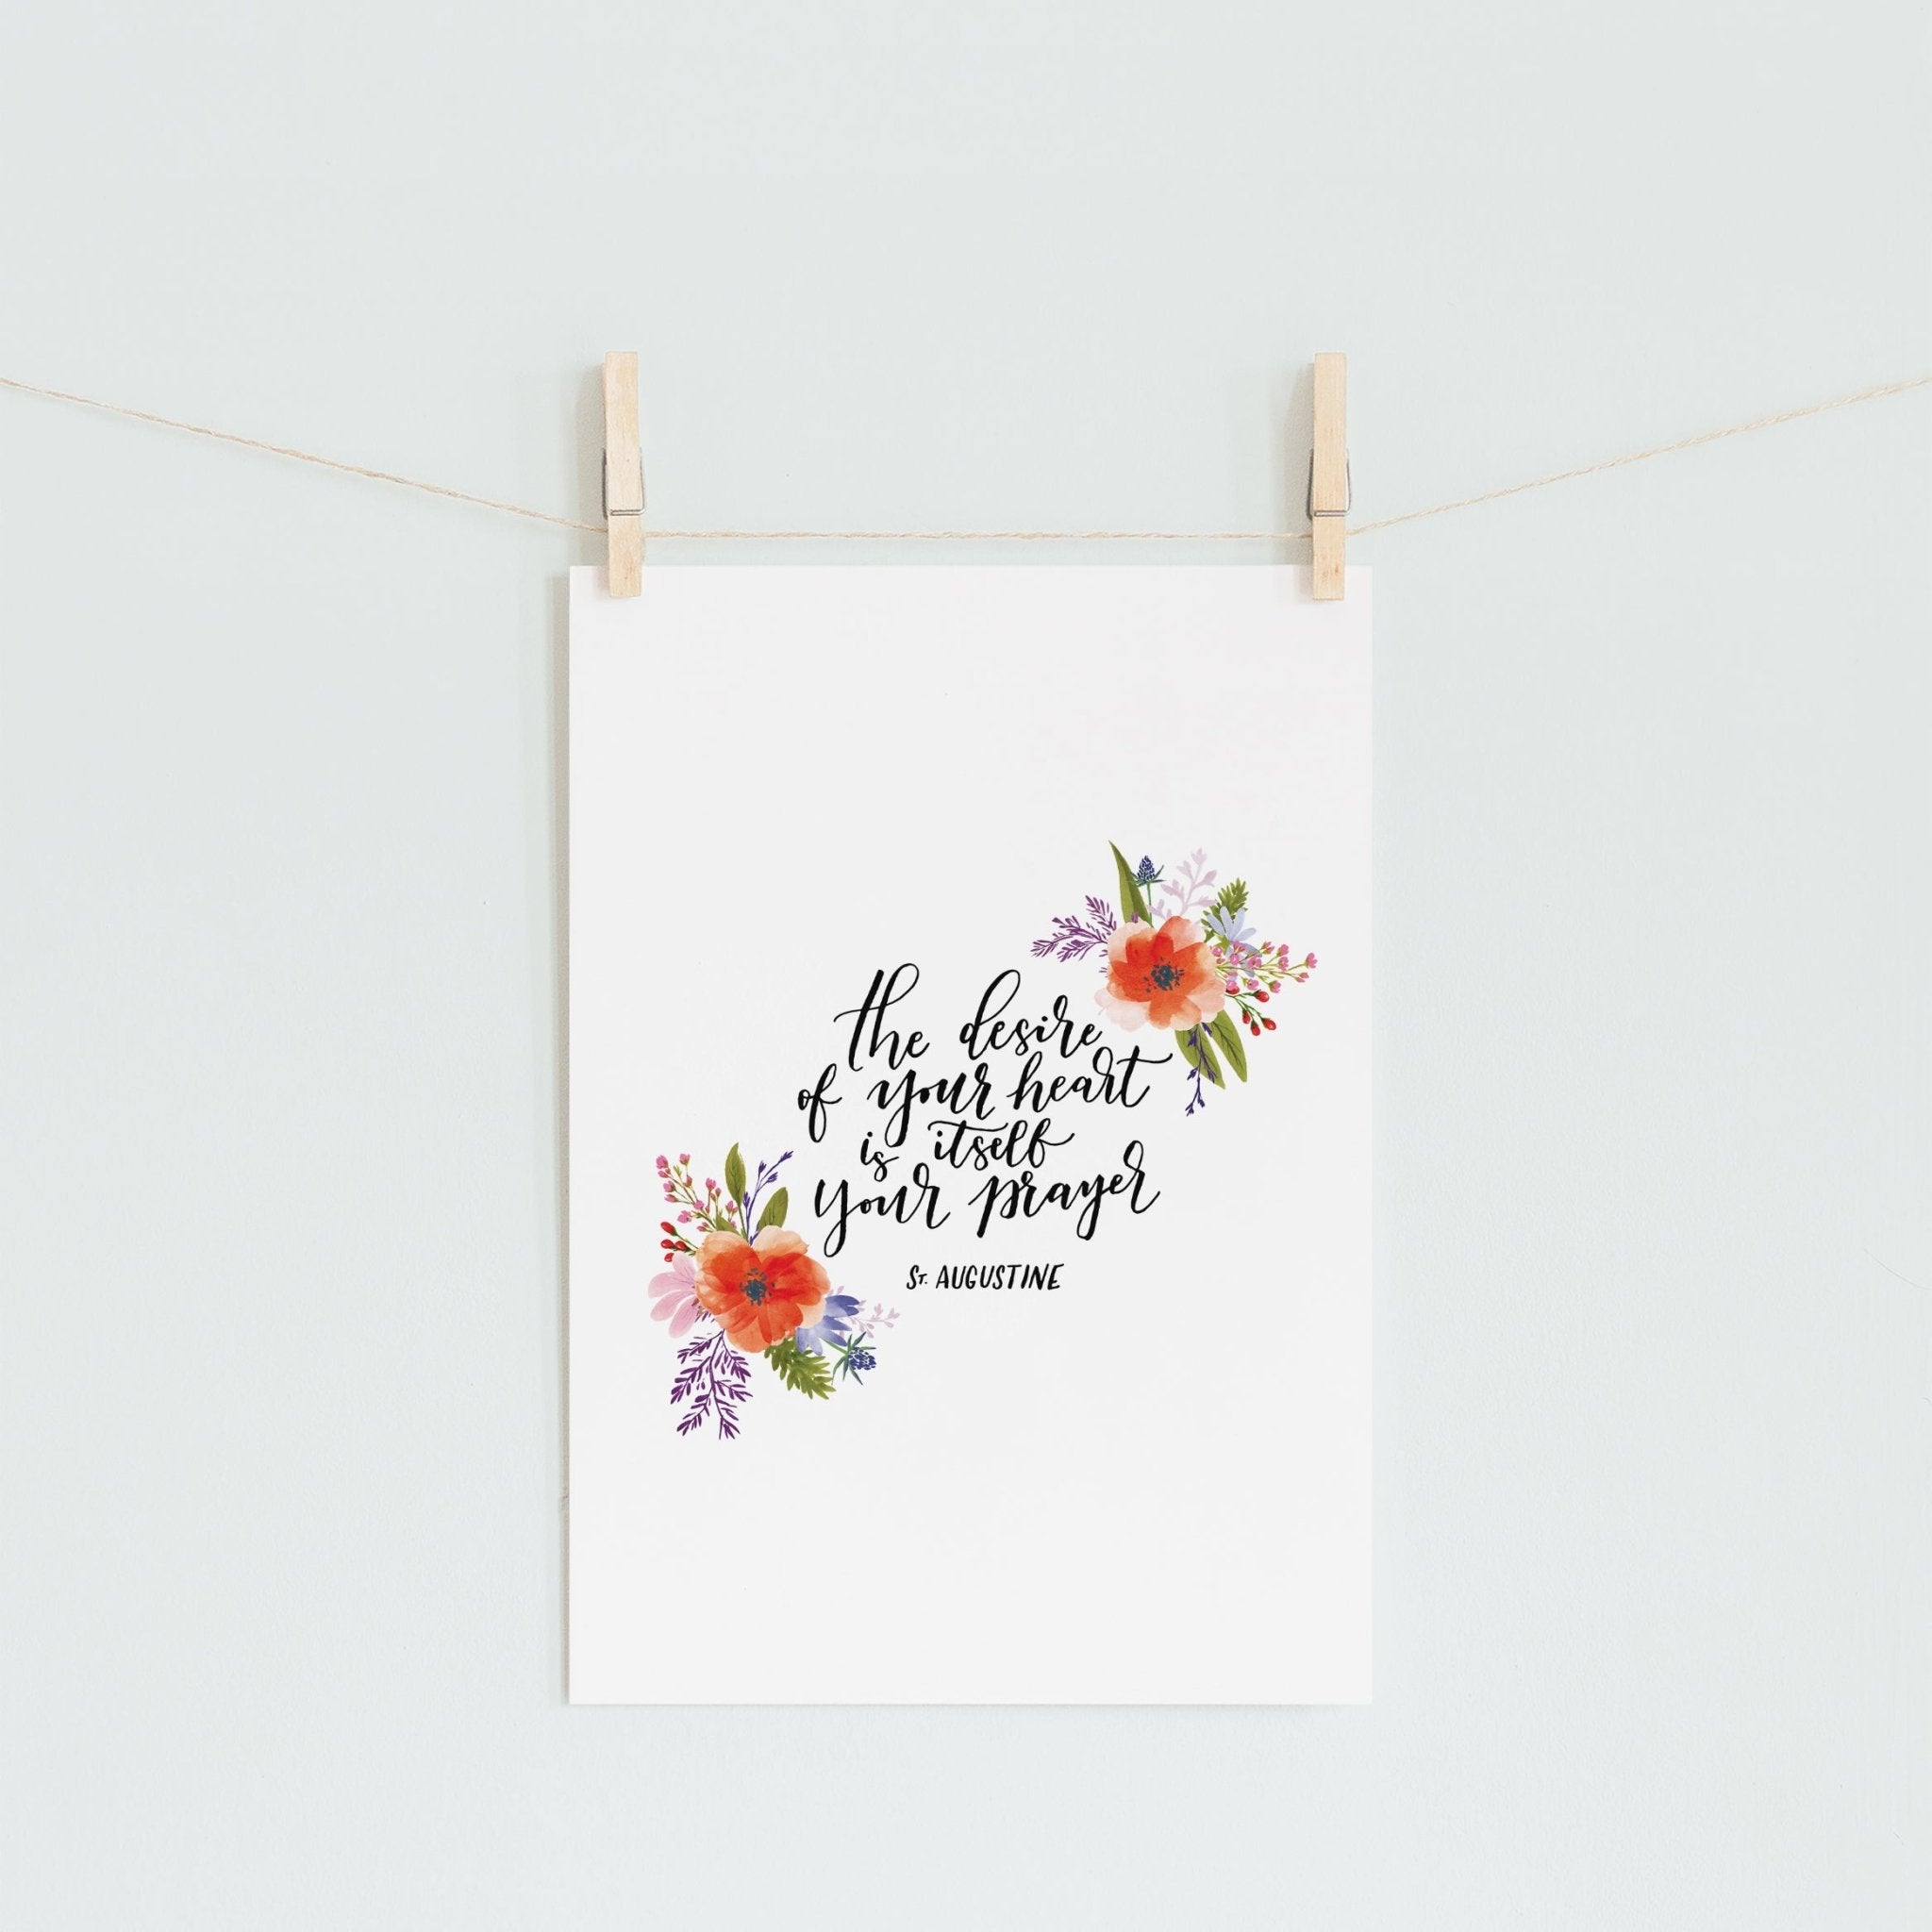 St. Augustine Hand Lettered Printable - Little Way Design Co.